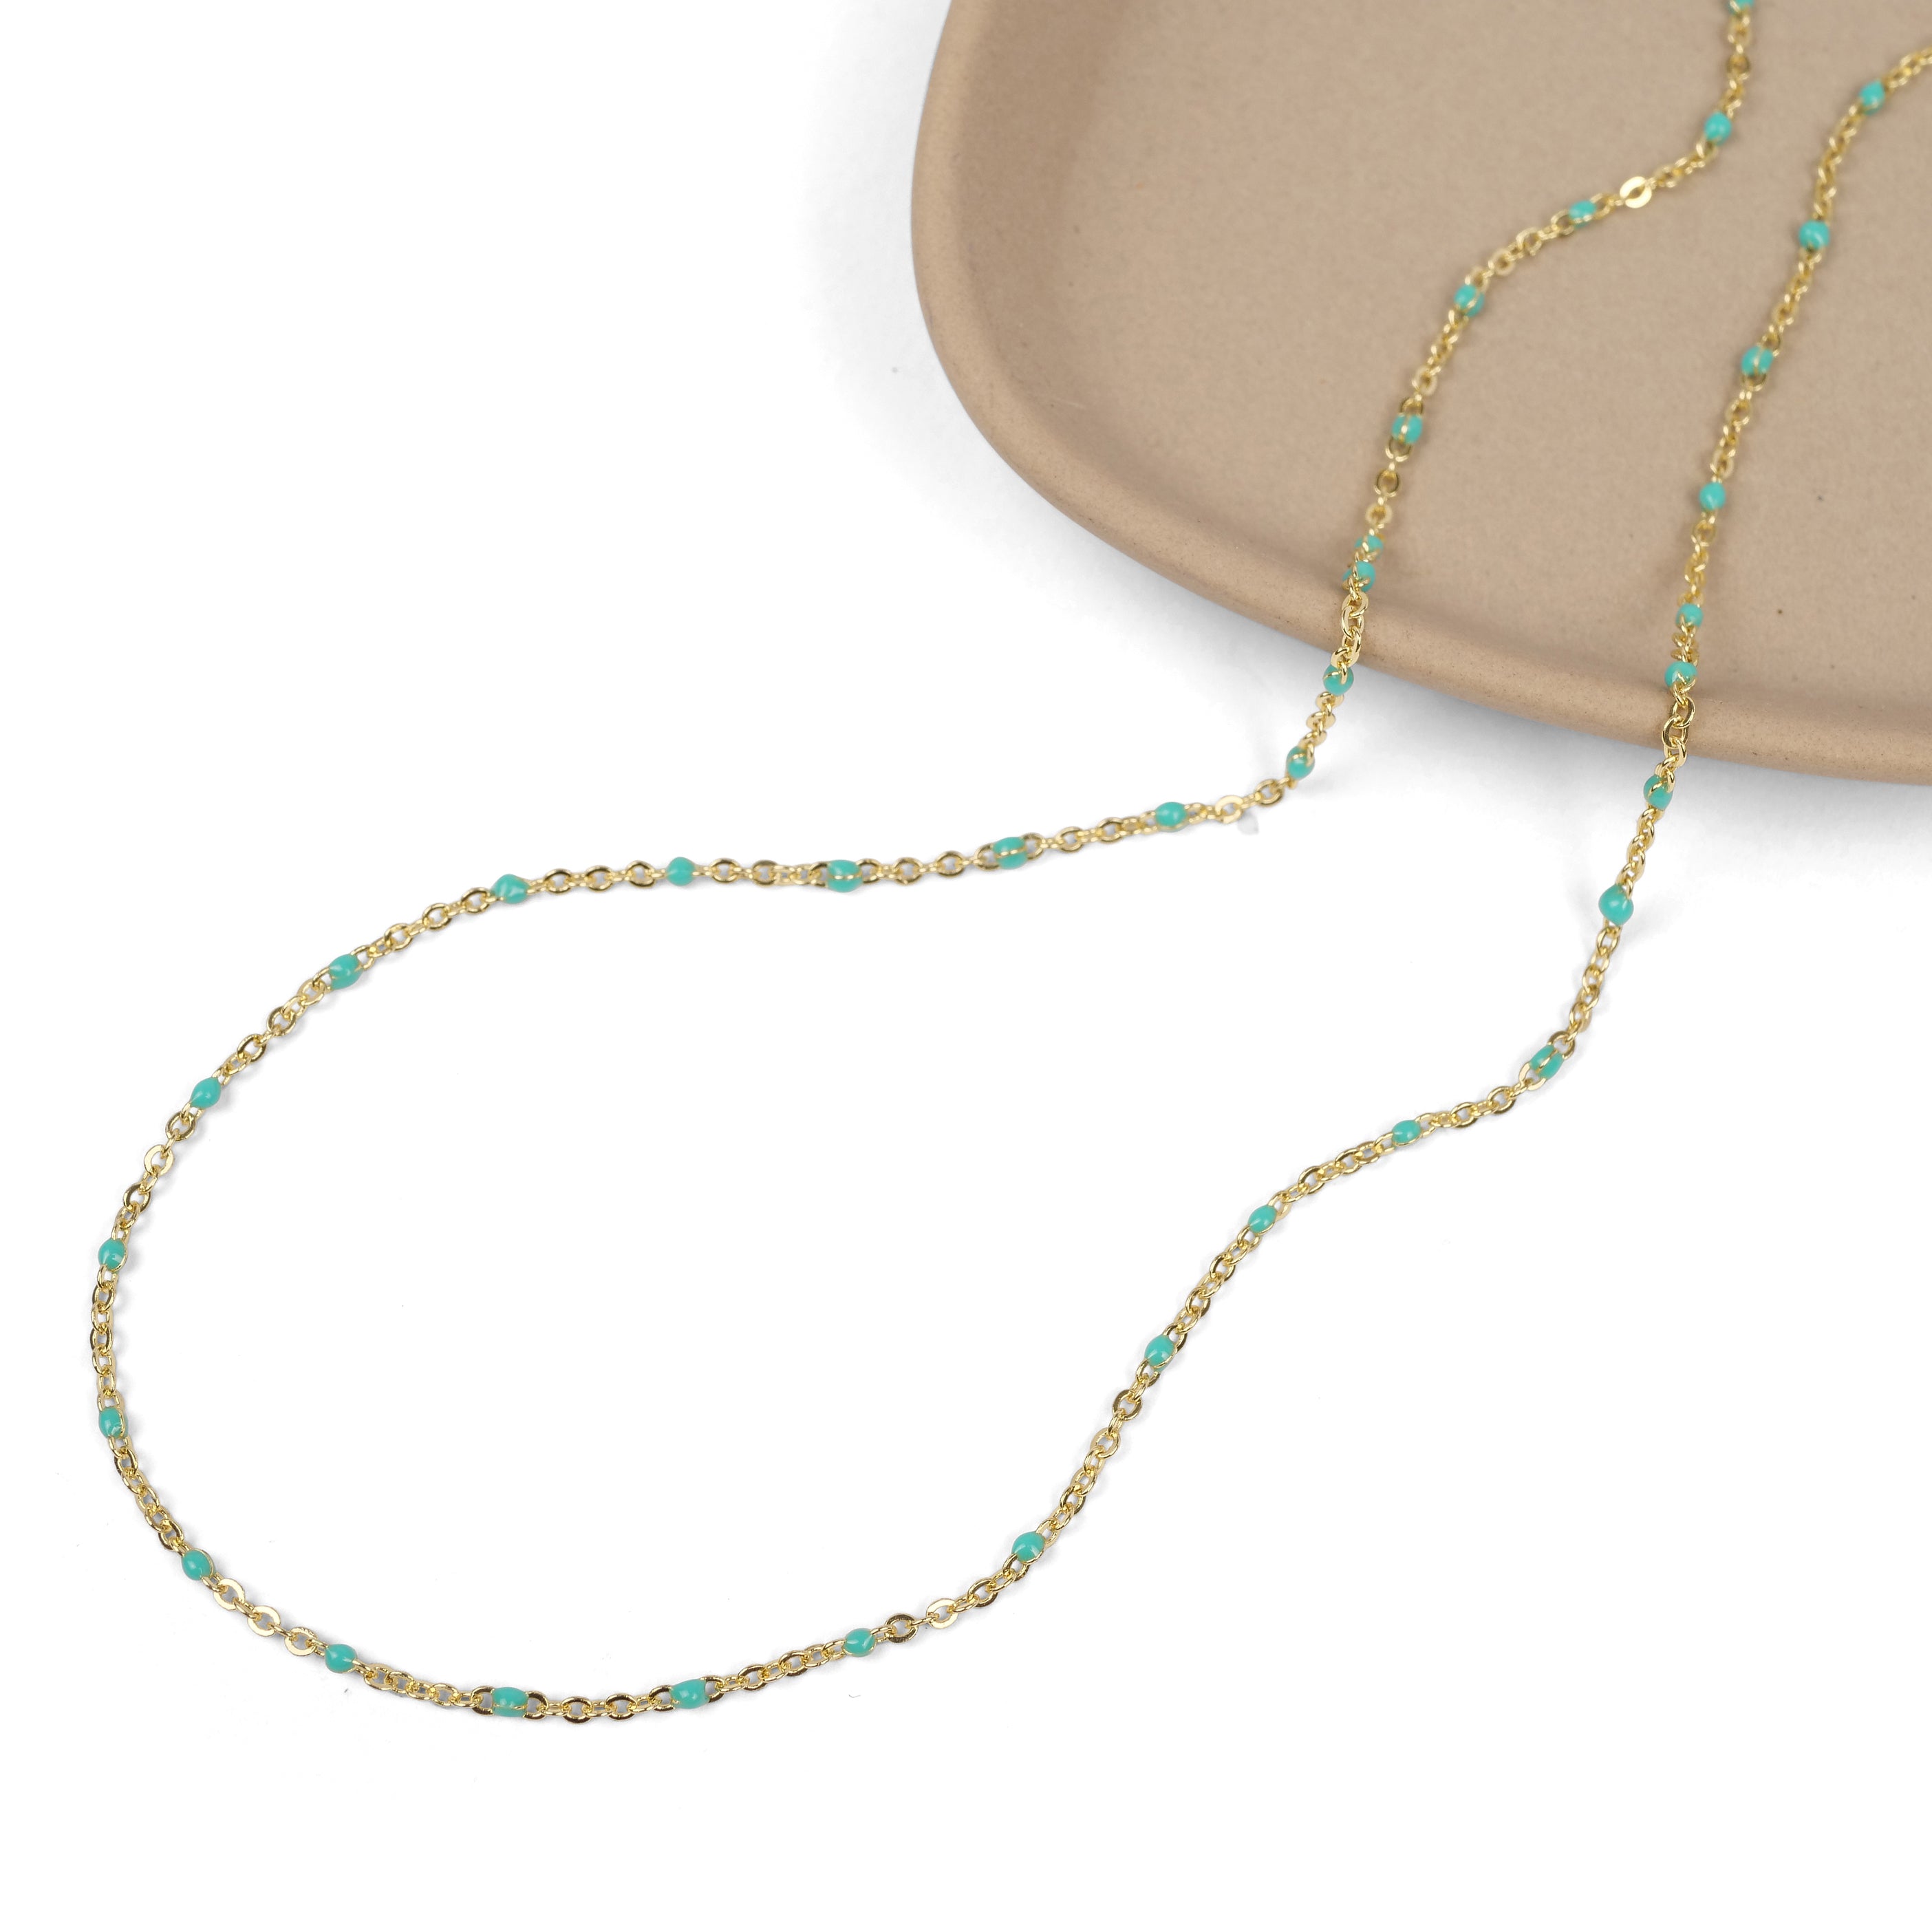 Delicate Green Bead Chain in Gold